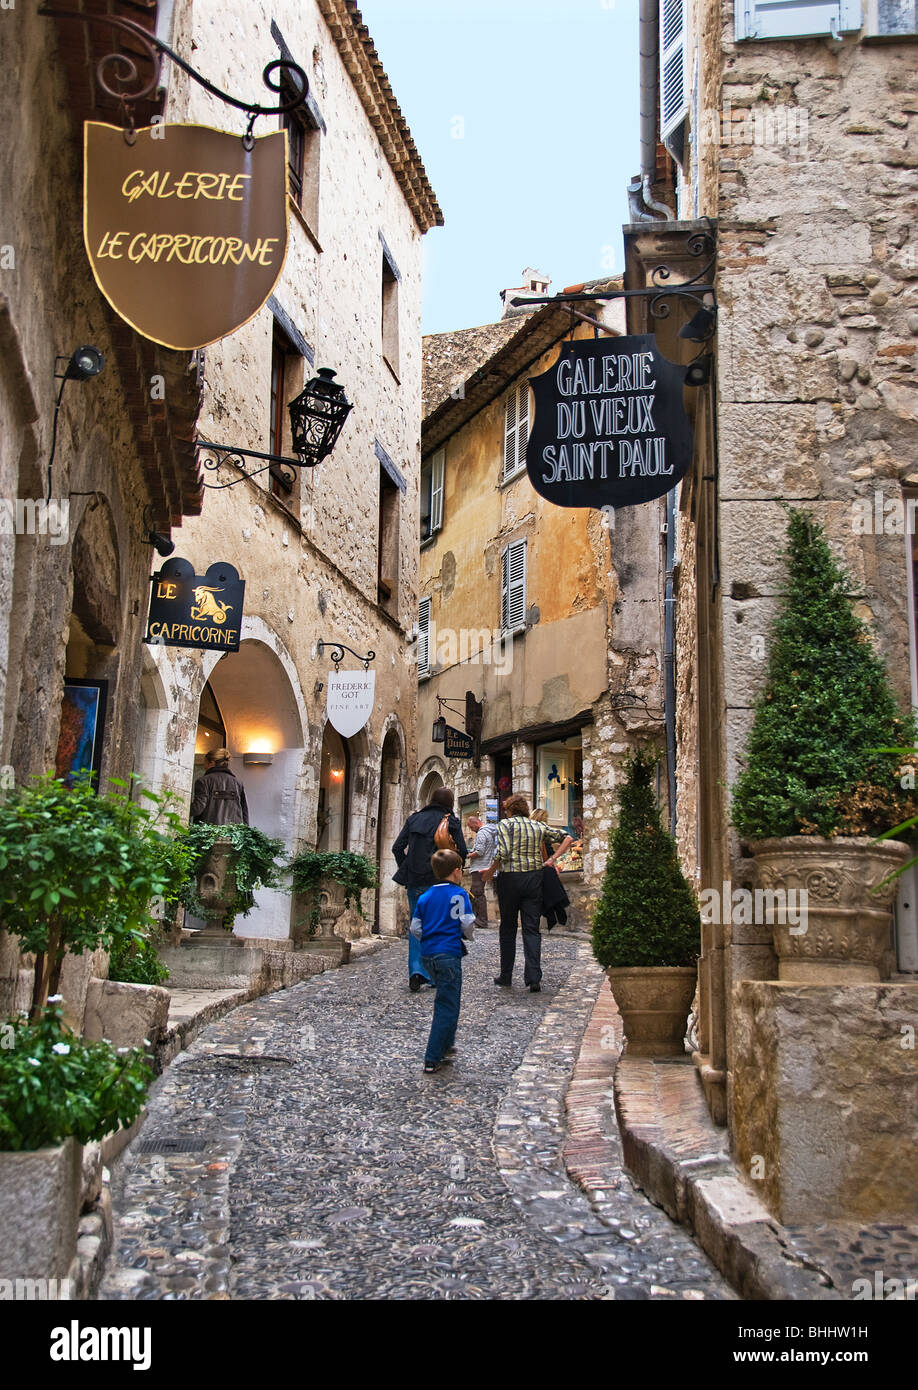 Sightseeing in St Paul de Vence Stock Photo